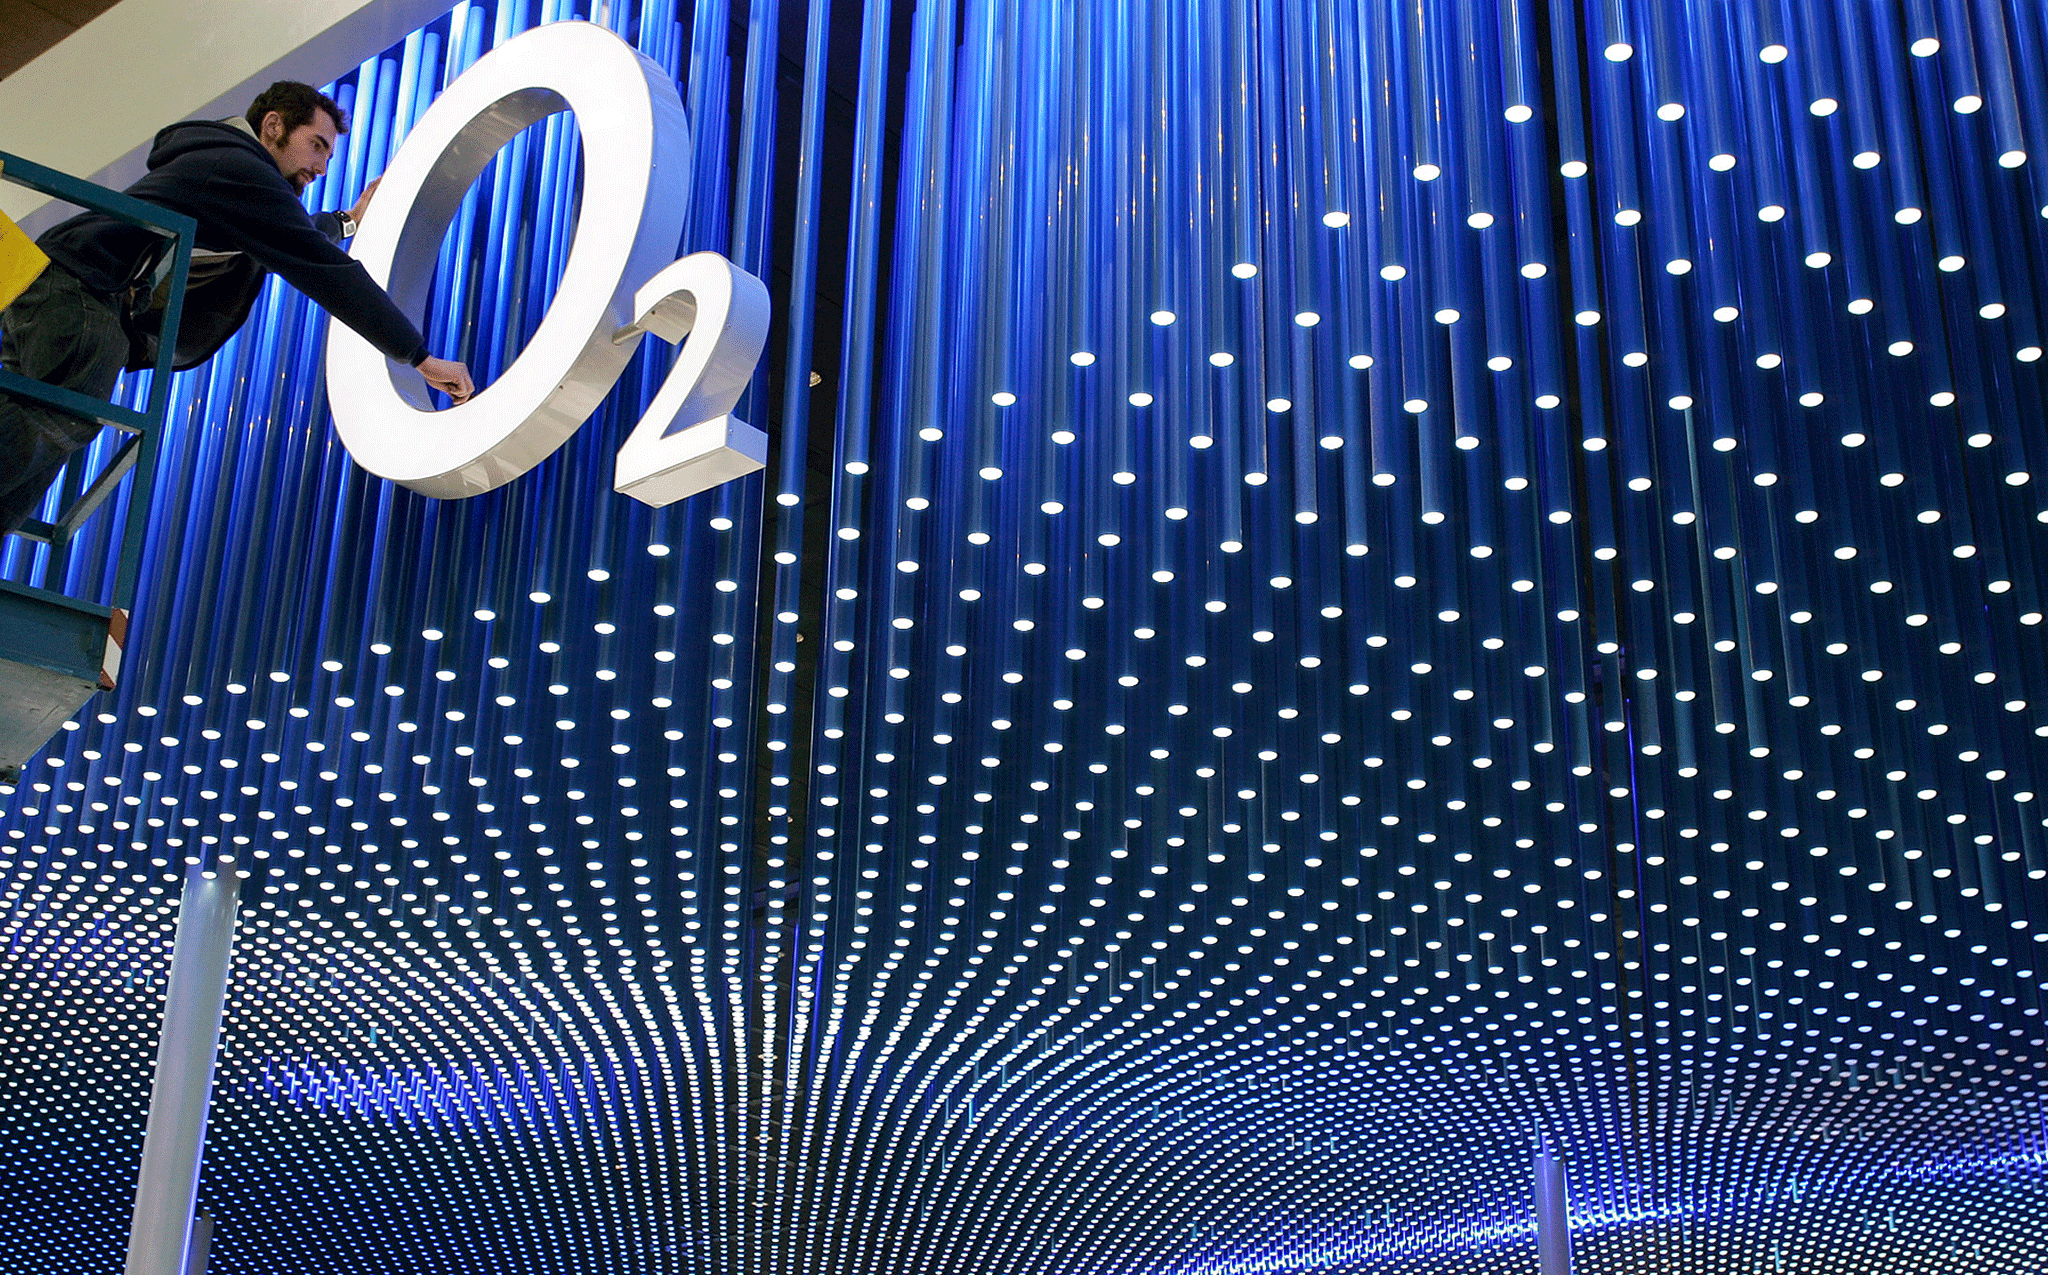 o2 owner Telefonica is considering an initial public offering for the British mobile operator